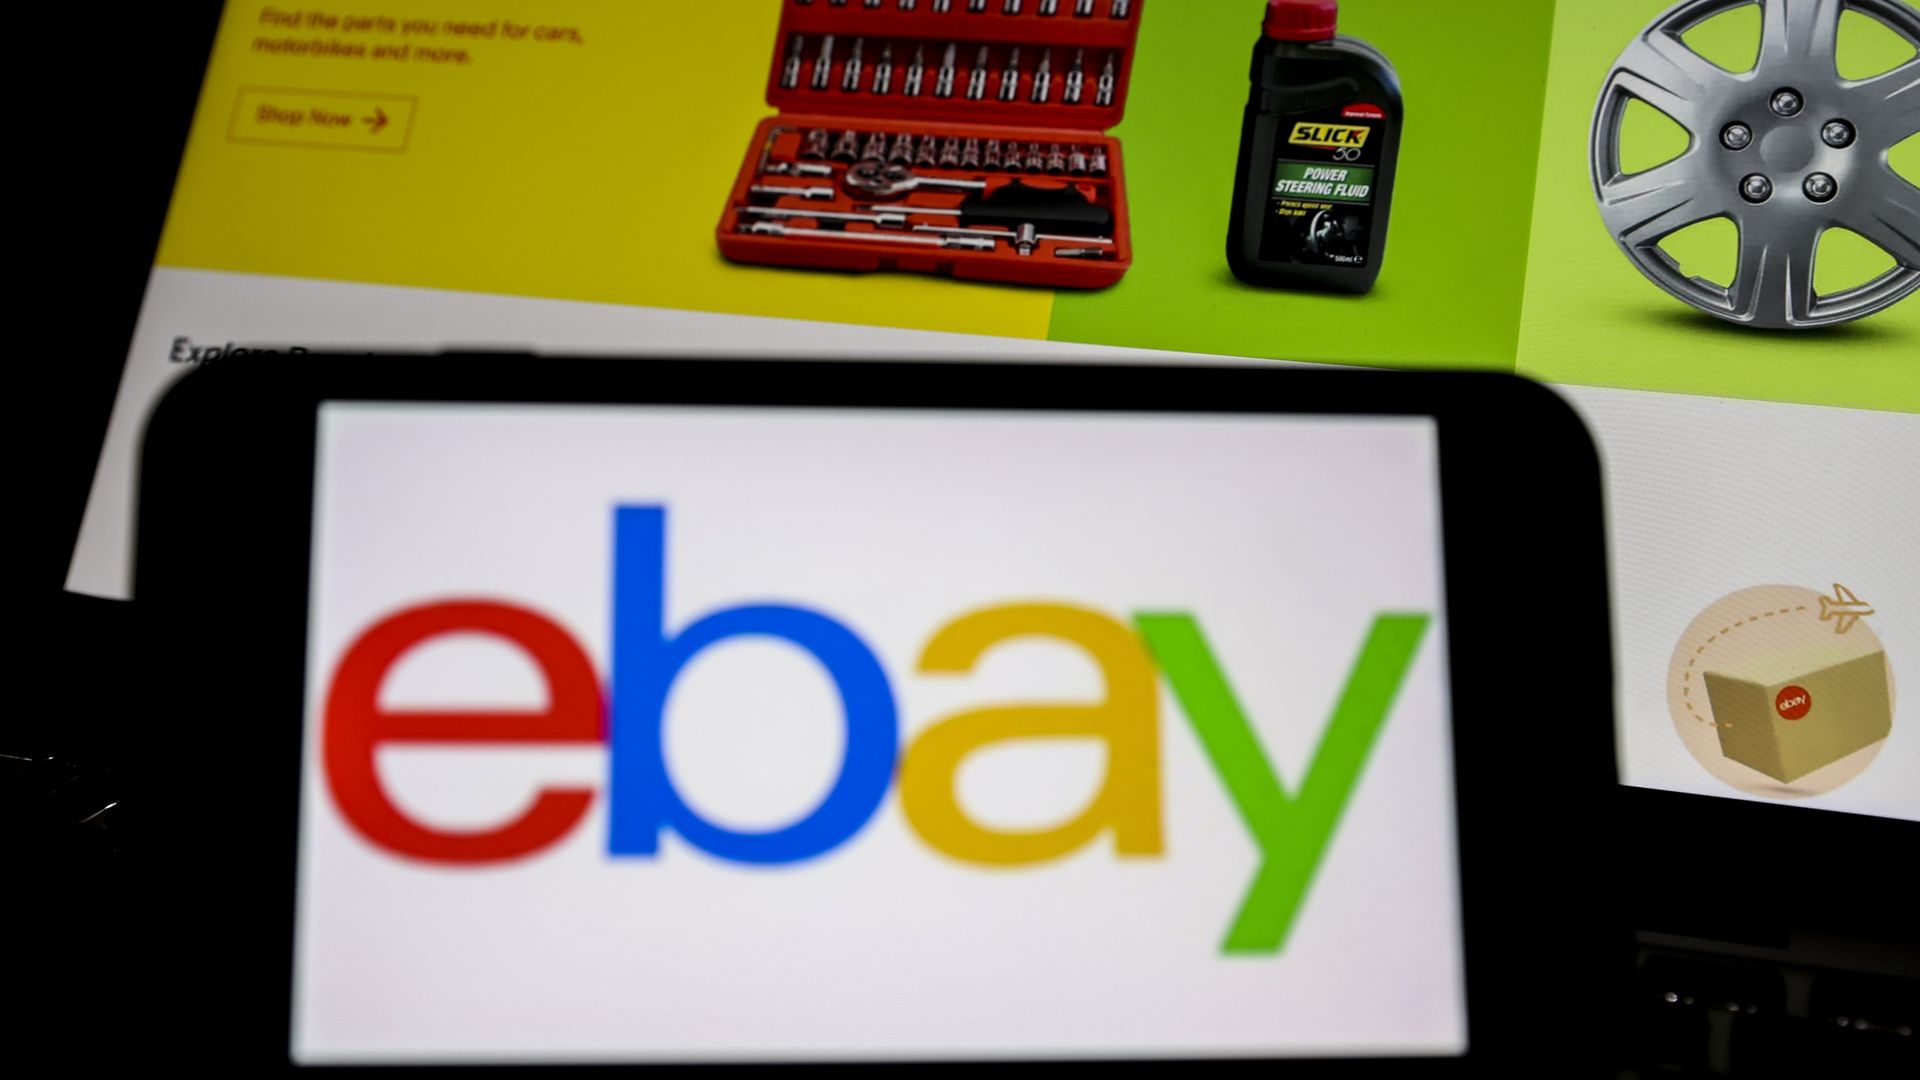 A photo illustration of the eBay logo on a phone, with a computer showing the eBay home page in the background.